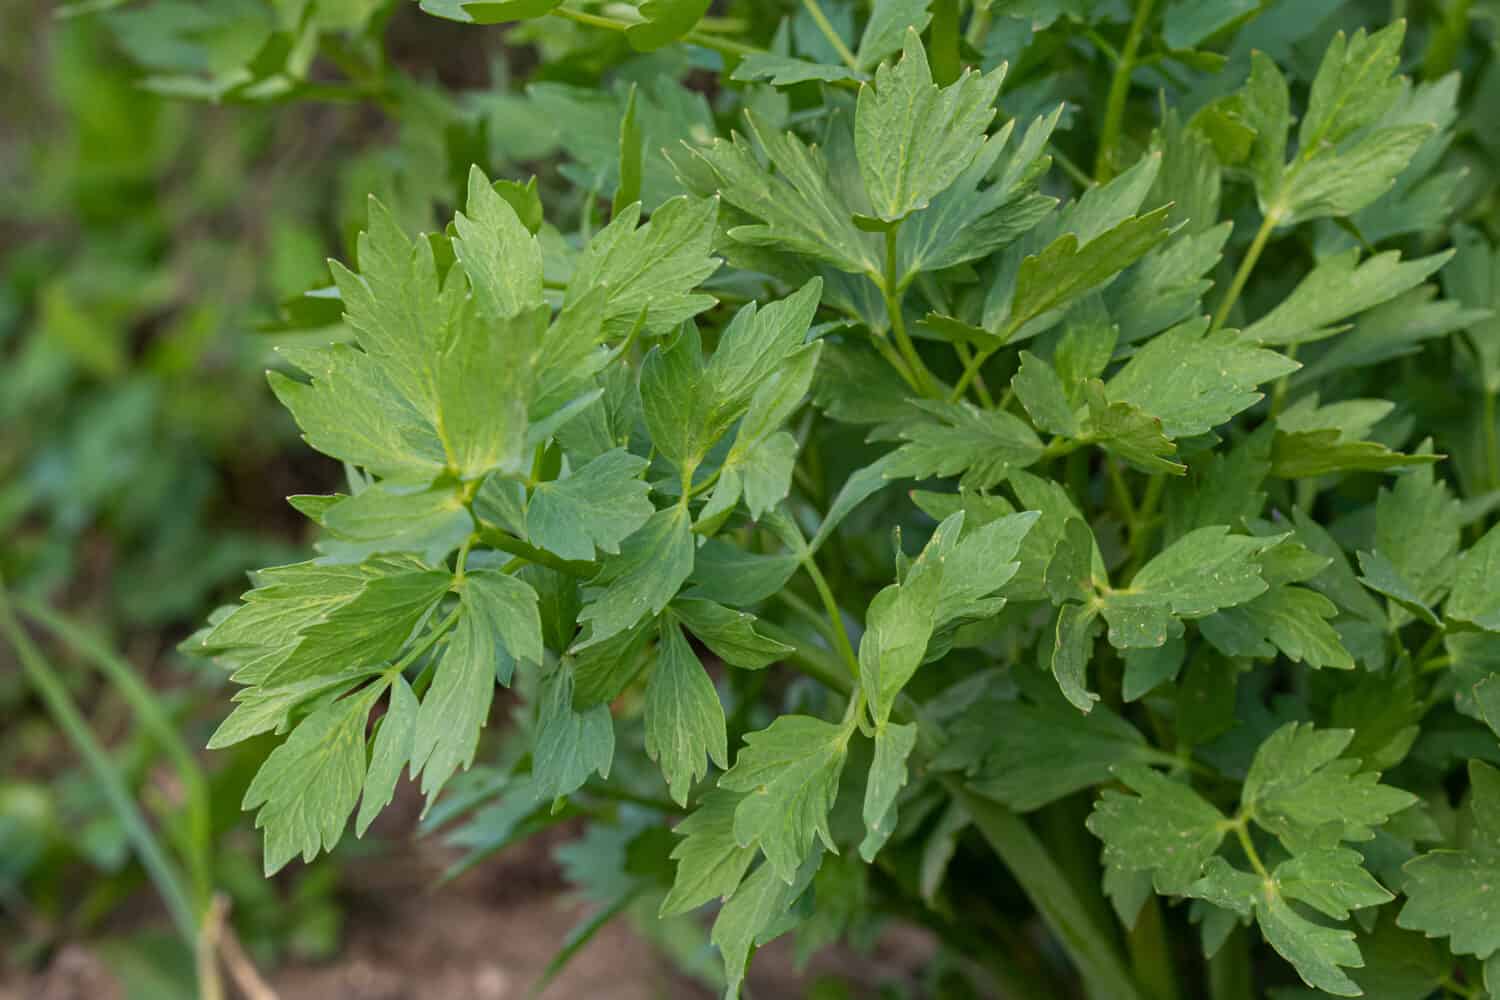 Spices and Herbs, Lovage plant (Levisticum officinale) growing in the garden.